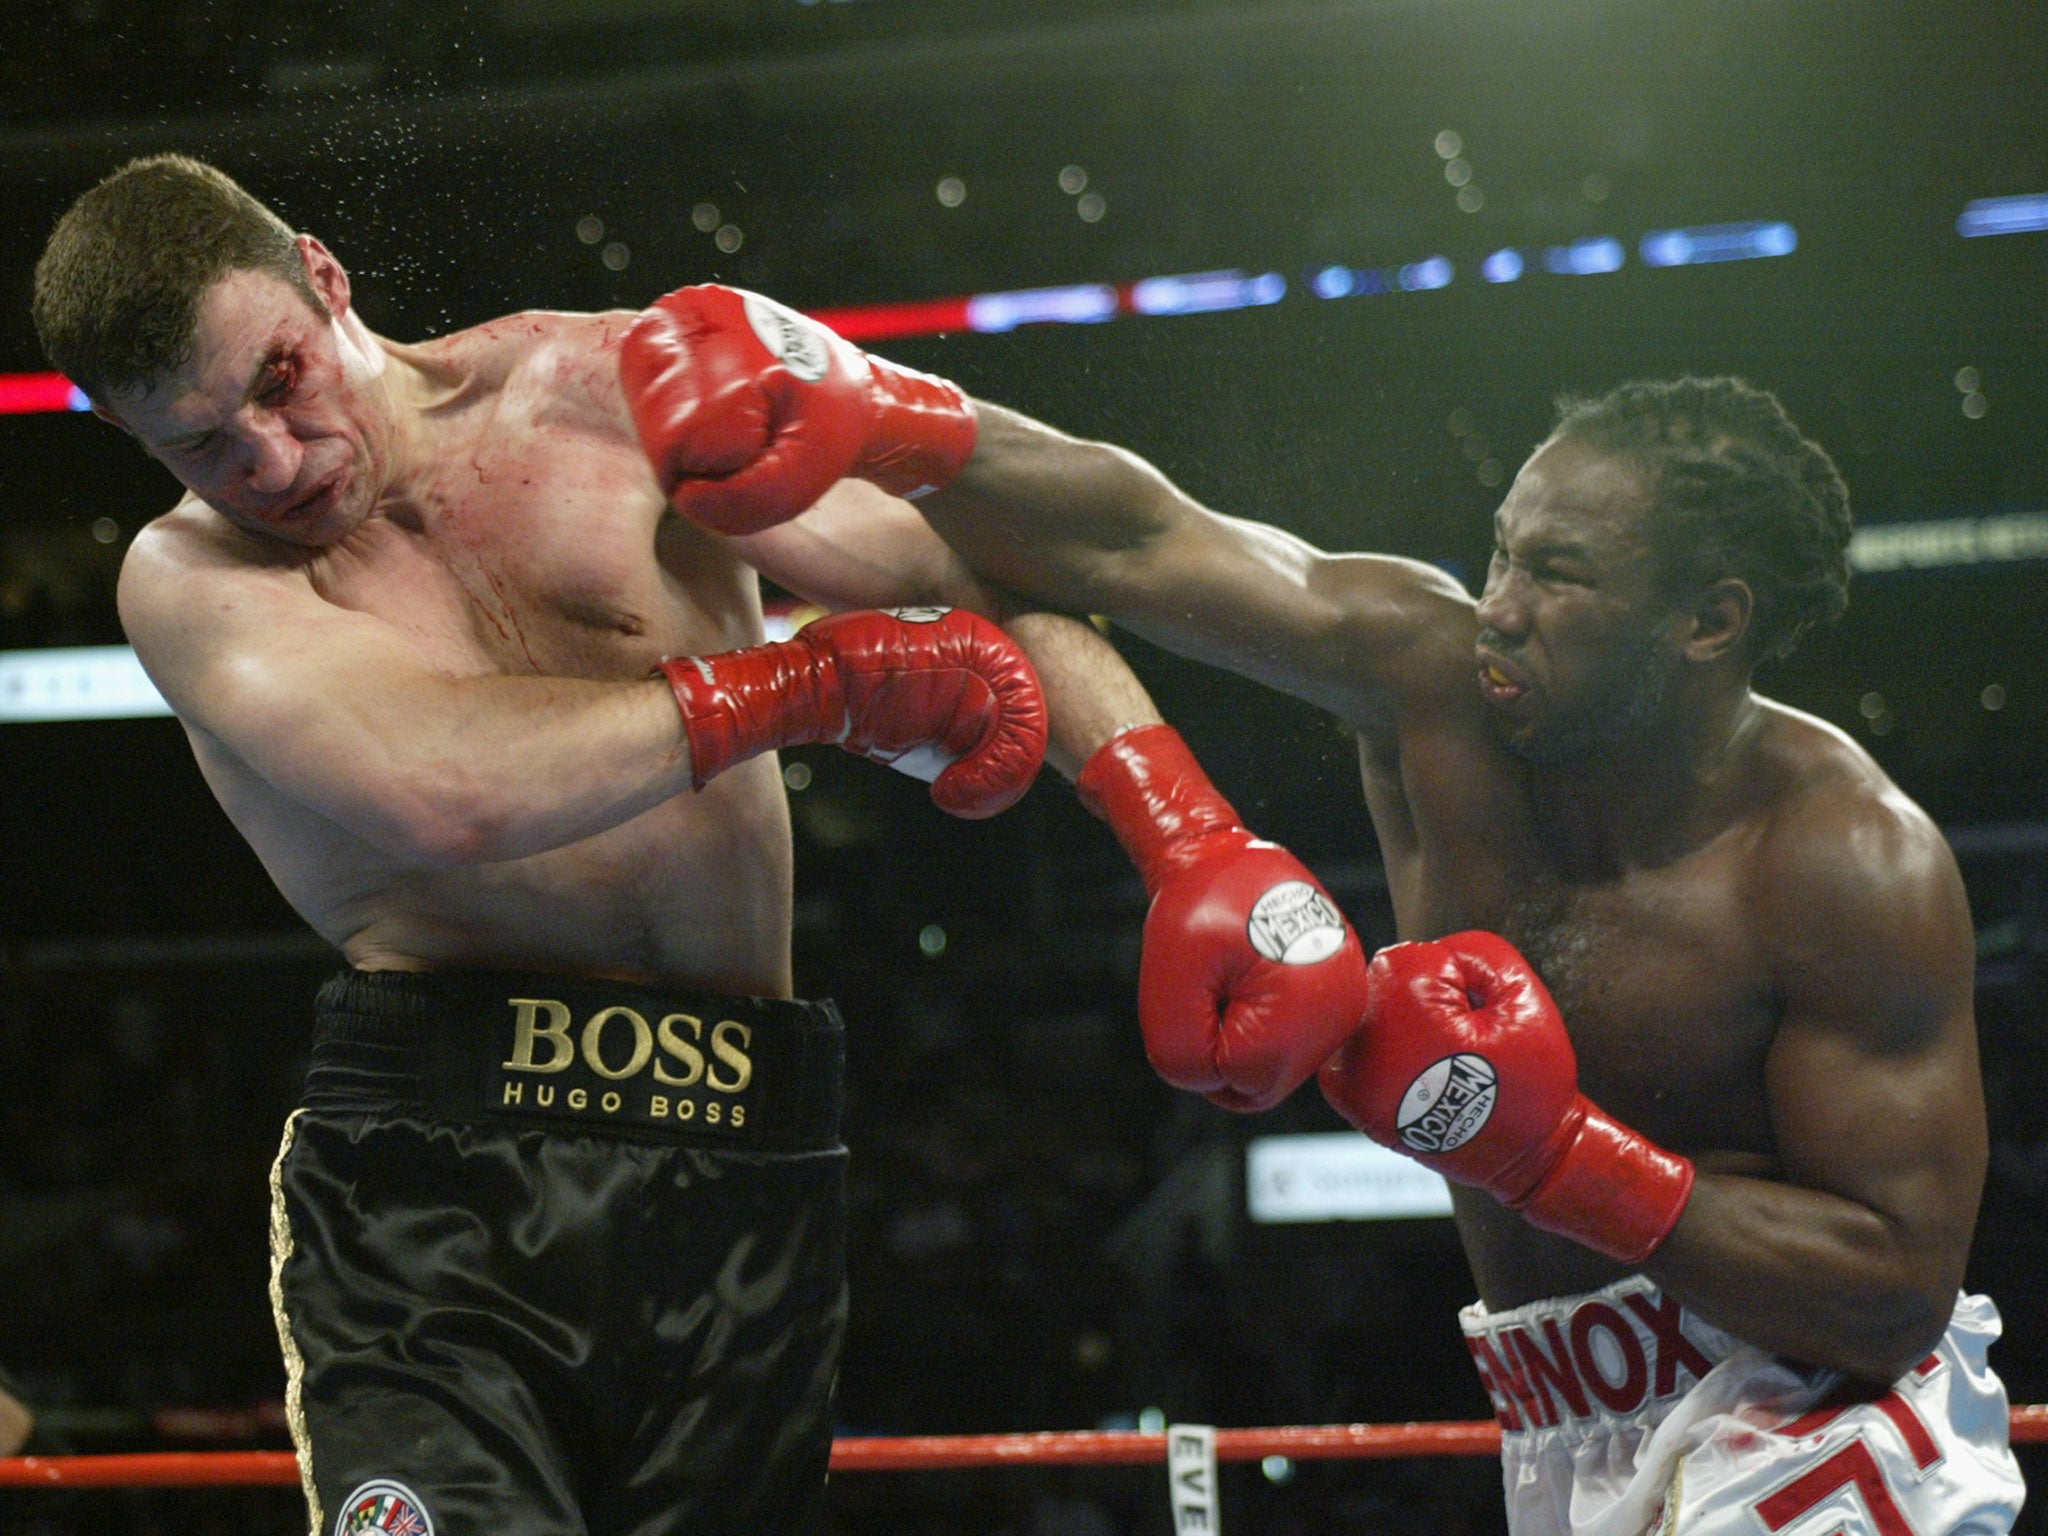 Lennox Lewis hasn't fought since 2003 when he beat Vitali Klitschko after he suffered a cut above his left eye